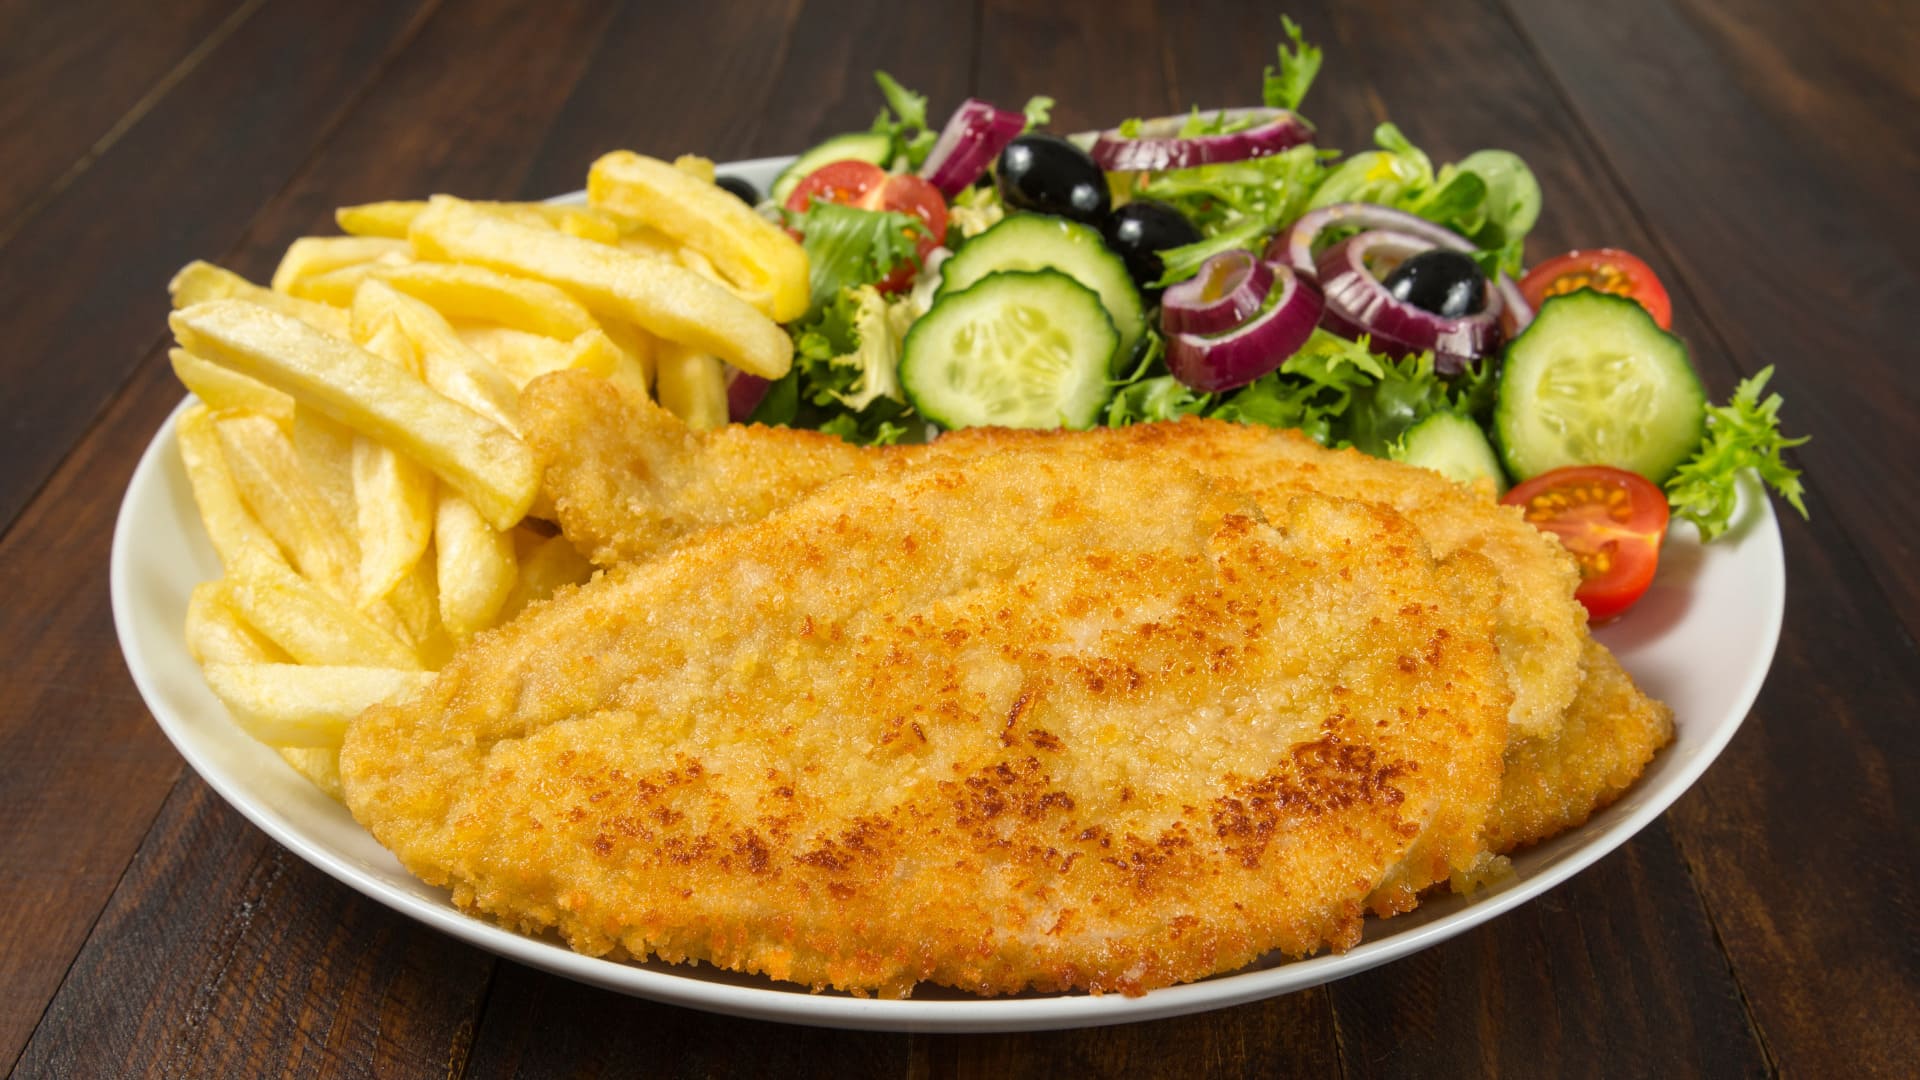 Get Your Crispy Fix with This Mouthwatering Chicken Schnitzel Recipe - A Classic Comfort Food Done Right!1